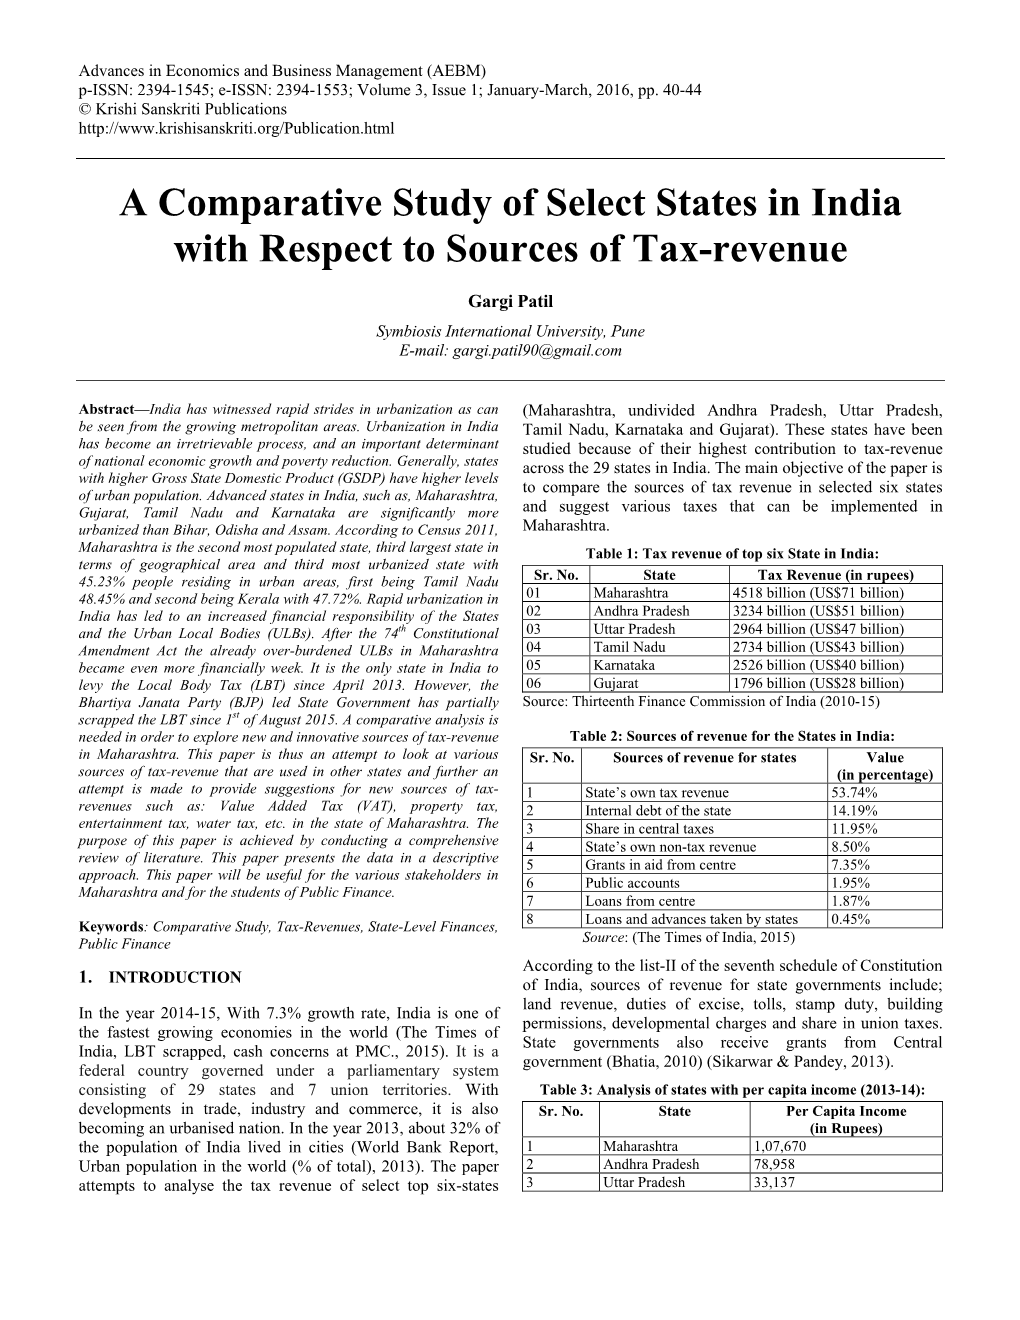 A Comparative Study of Select States in India with Respect to Sources of Tax-Revenue